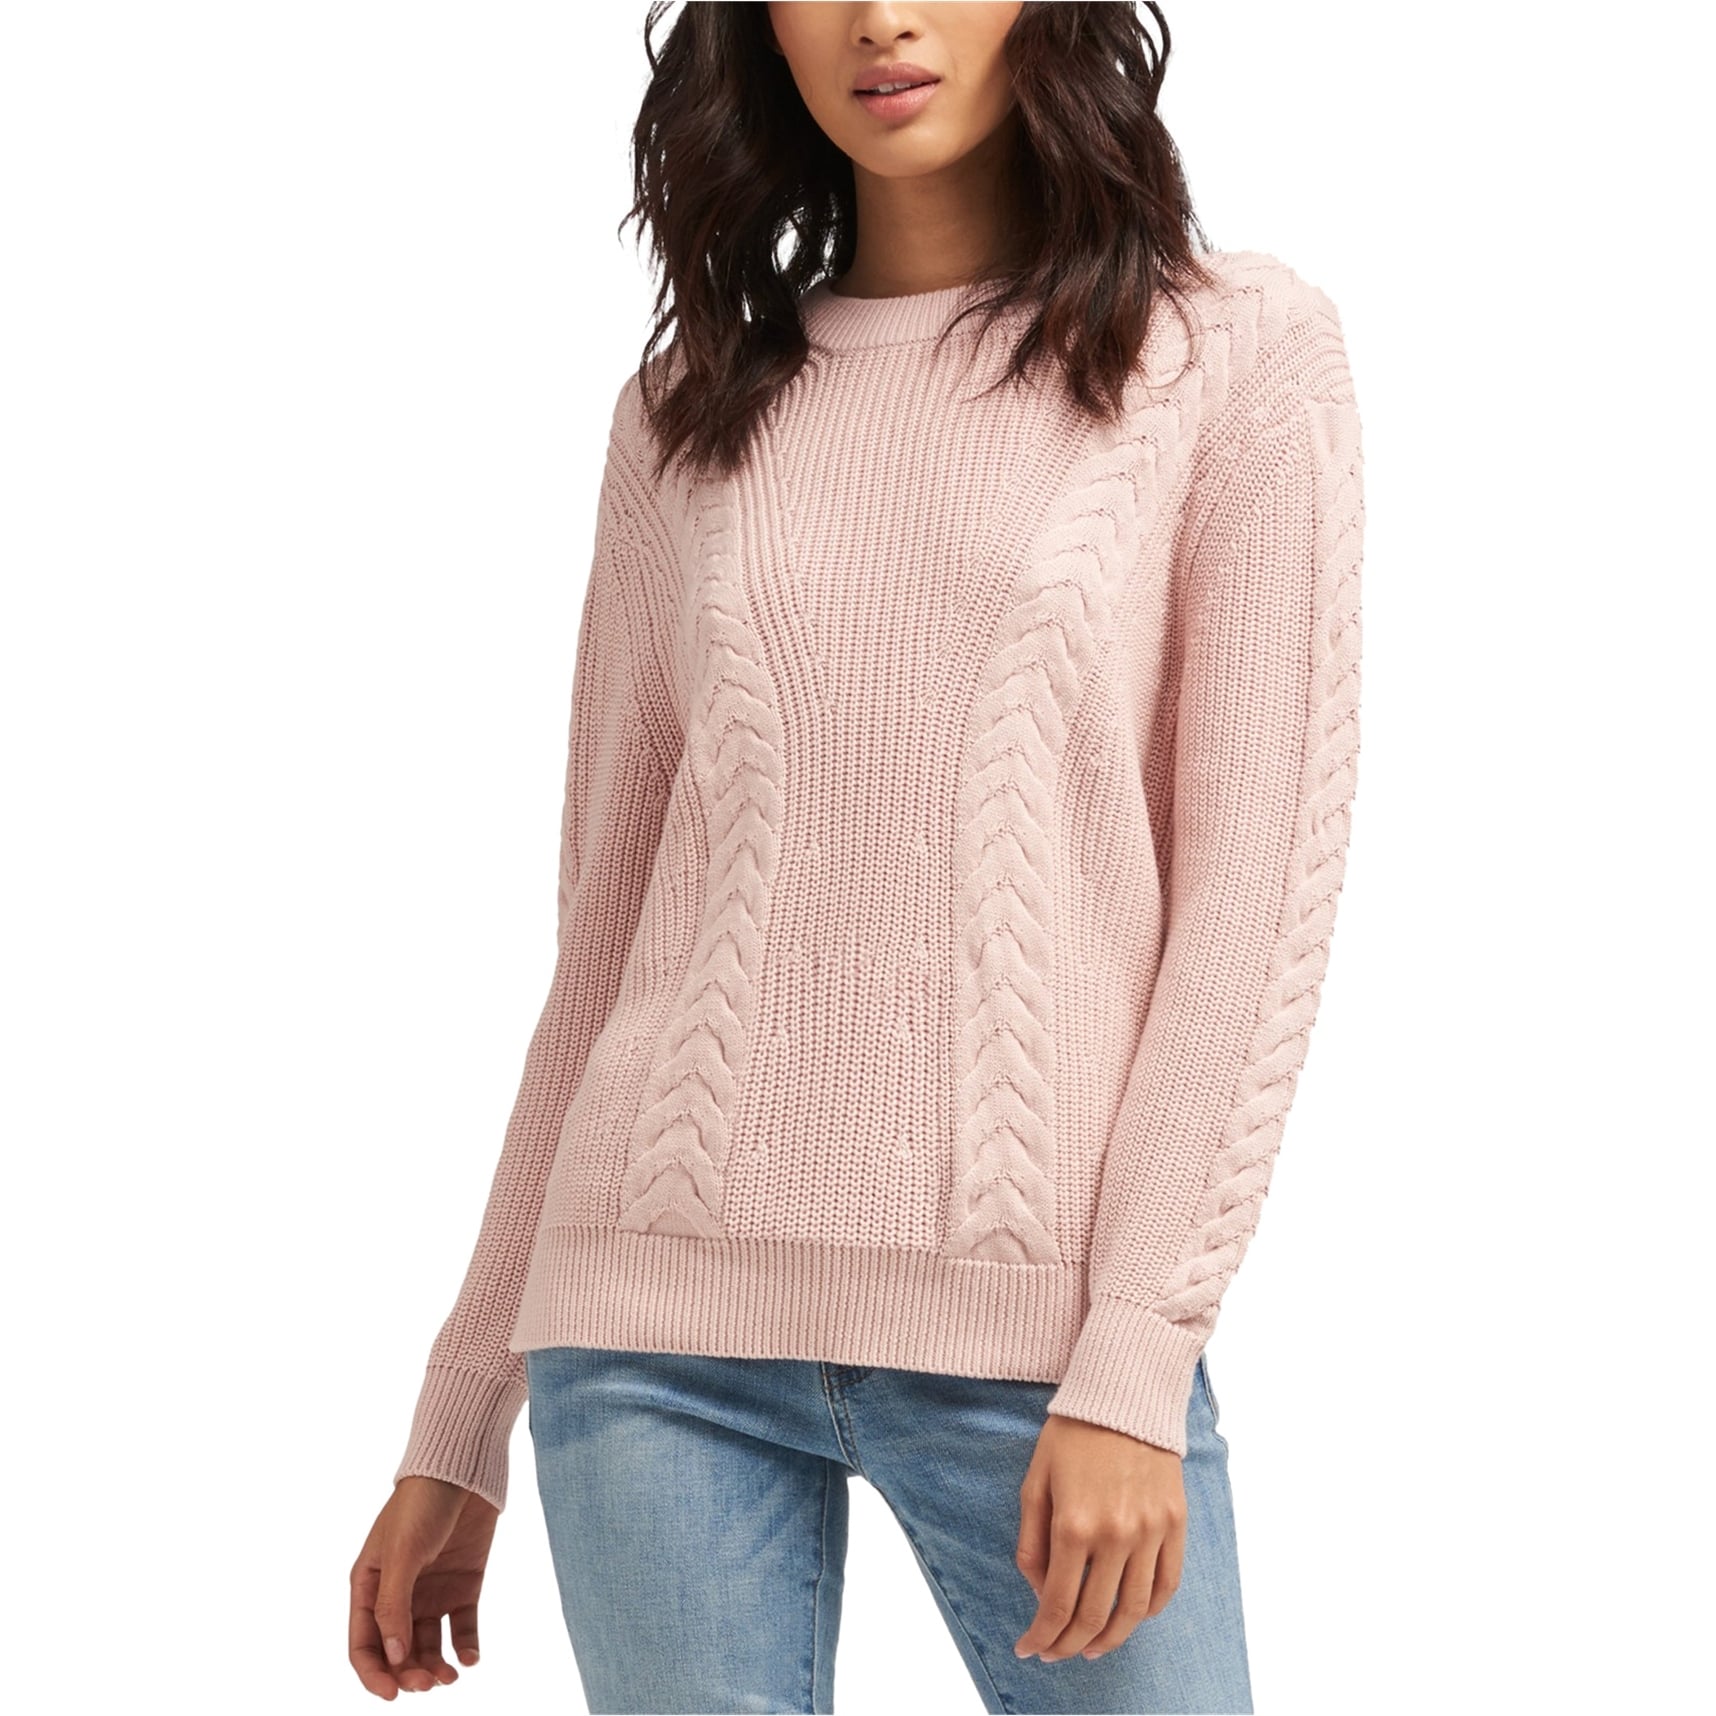 Dkny Womens Cotton Pullover Sweater